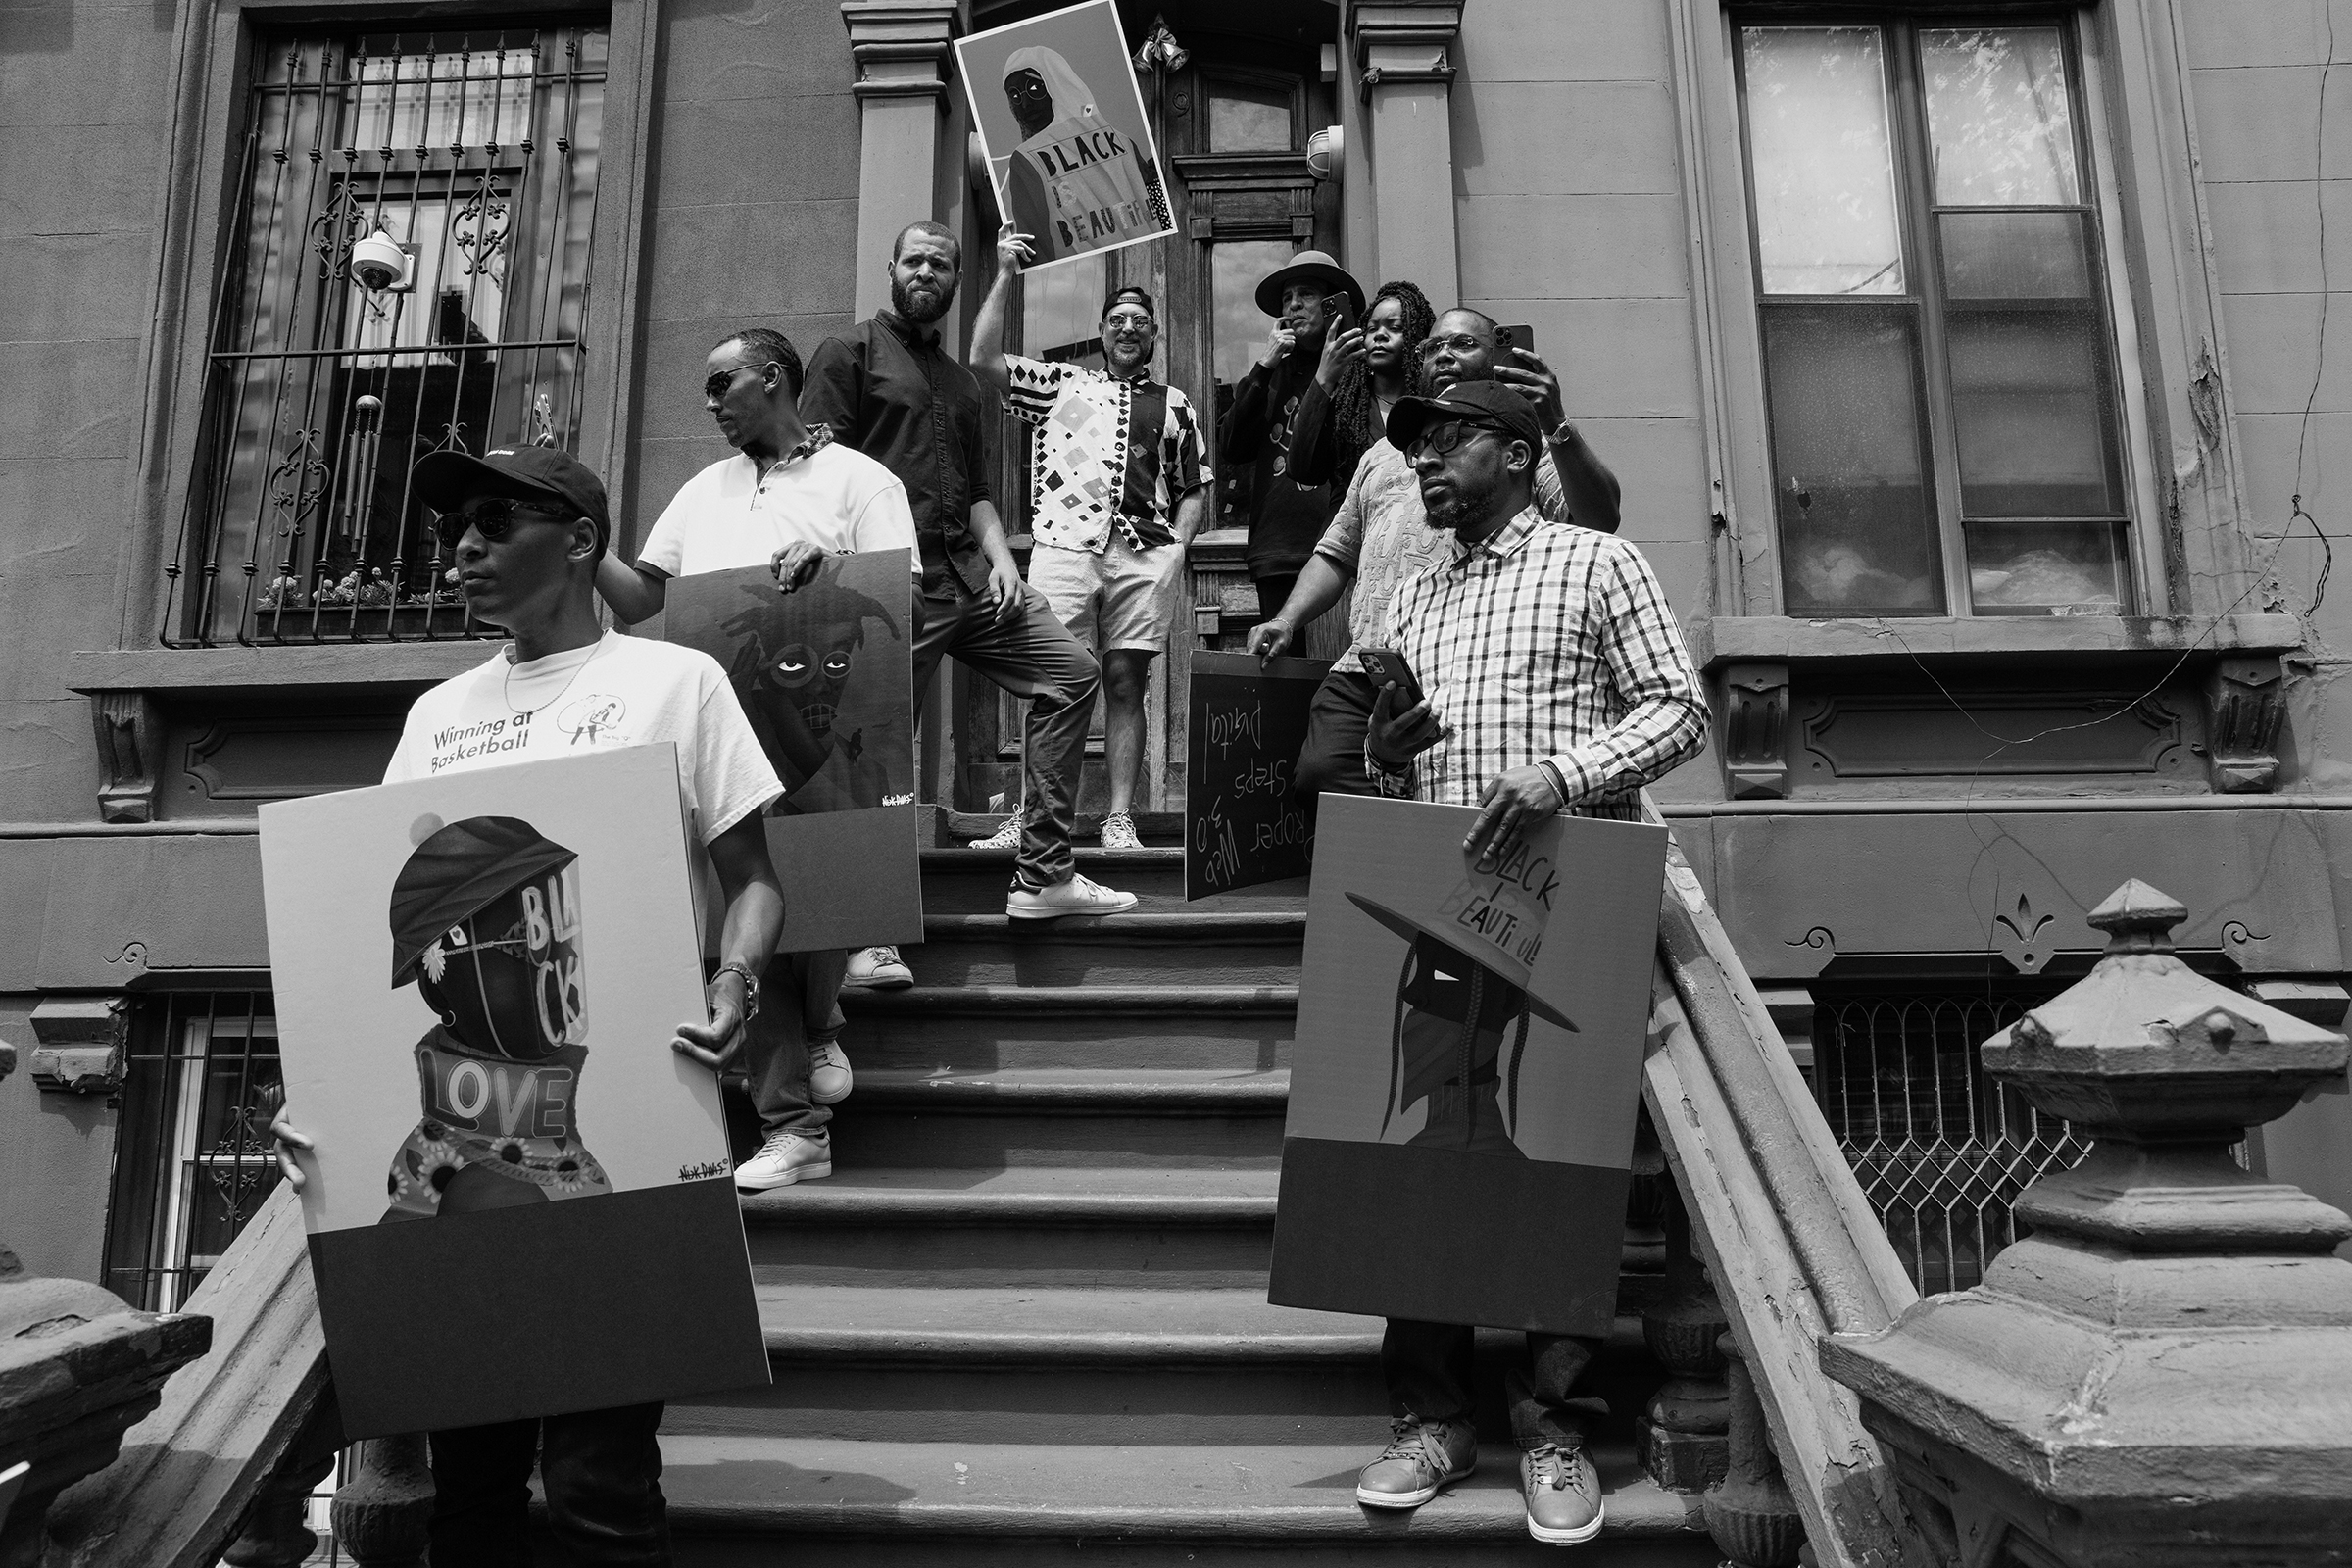 Artists and NFT enthusiasts showcase NFT art from the Harlem stoop. (Gioncarlo Valentine for TIME)